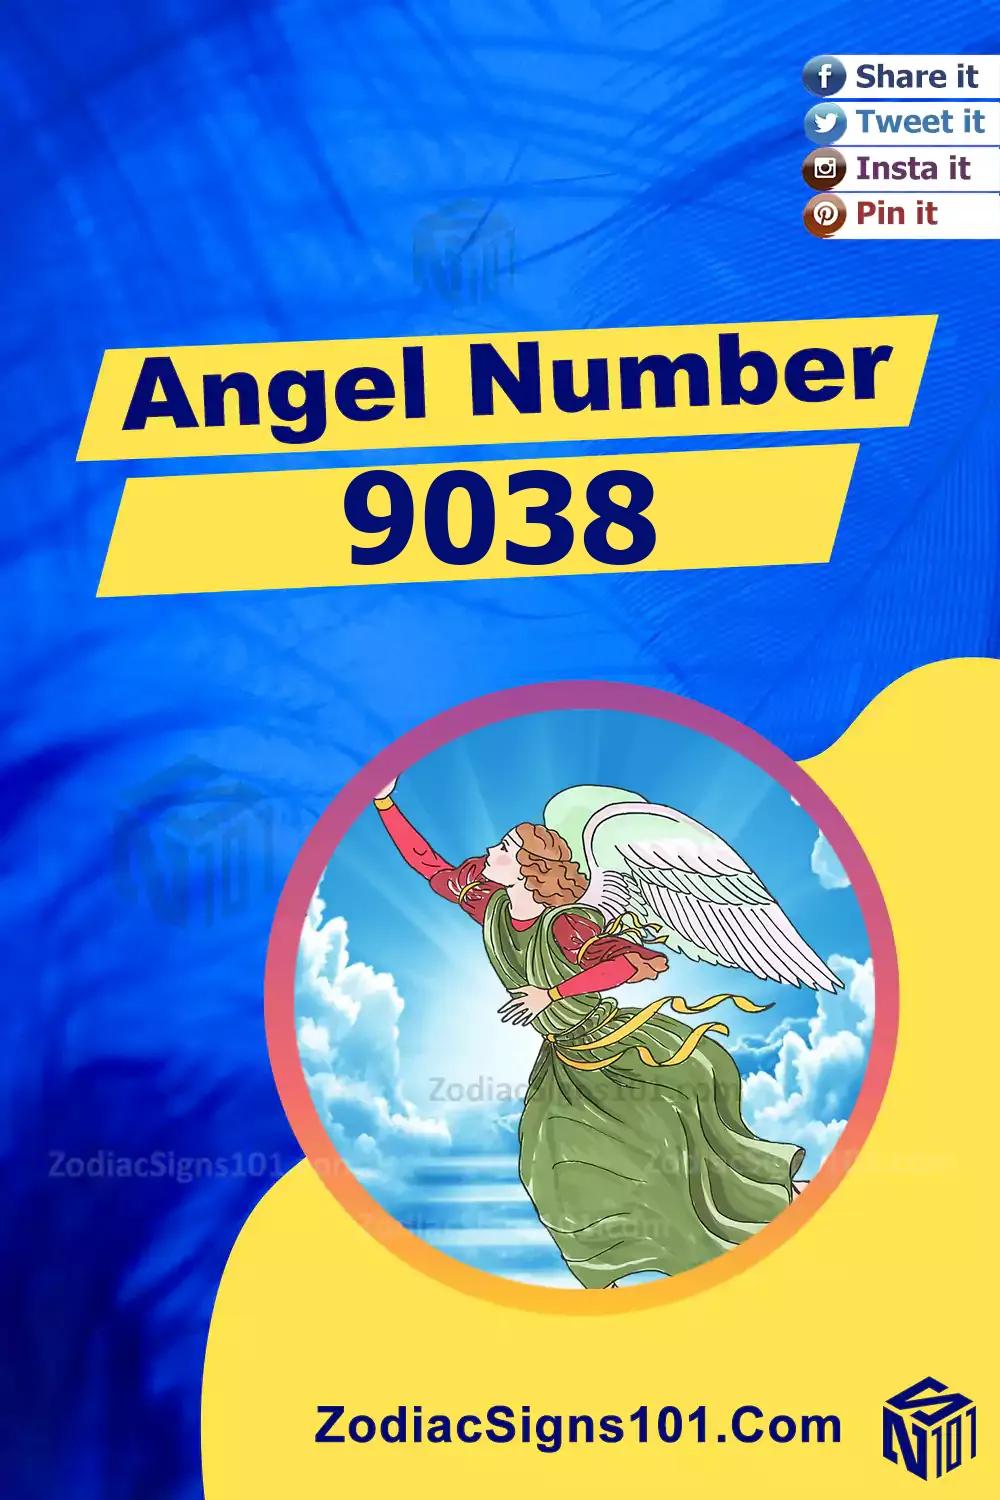 9038 Angel Number Meaning